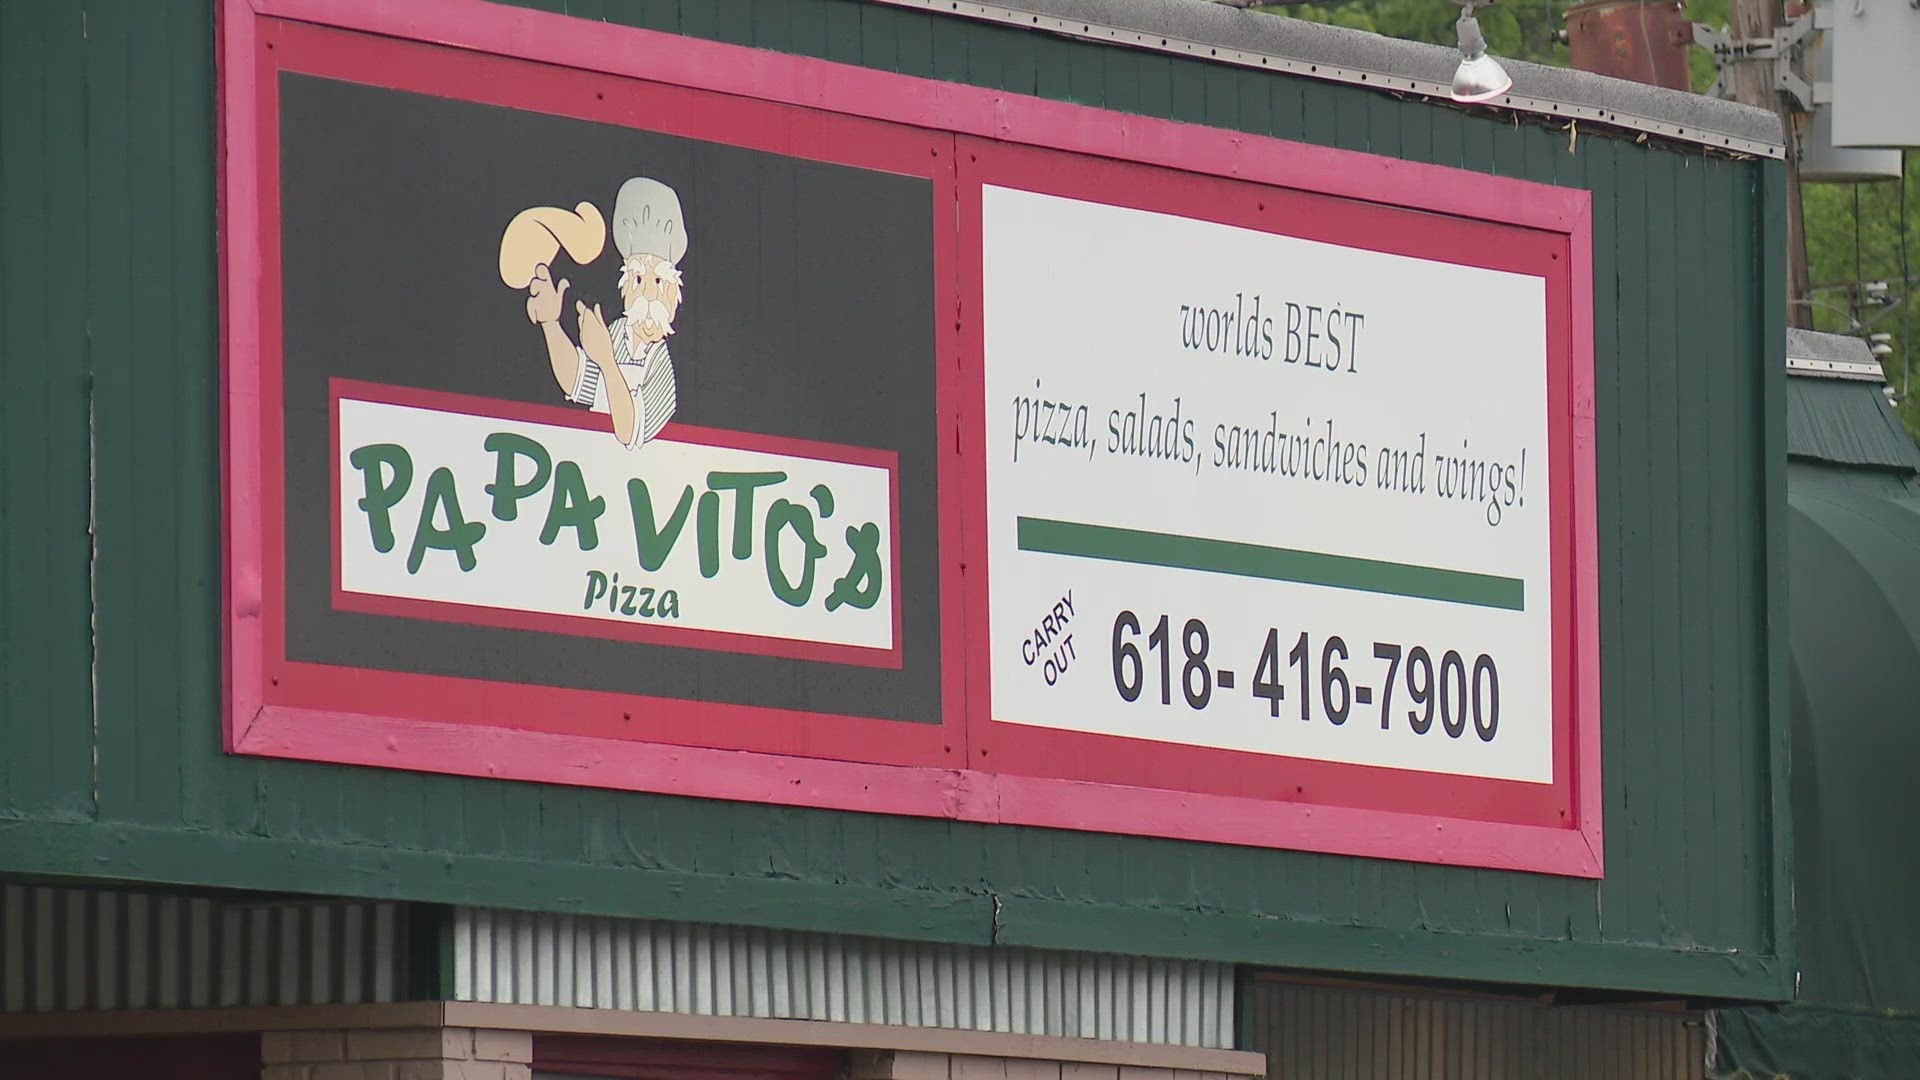 Papa Vito's Pizza offers some great pizza in Belleville. The building is allegedly haunted, too! The pizza shop's website says two spirits are frequent guests.